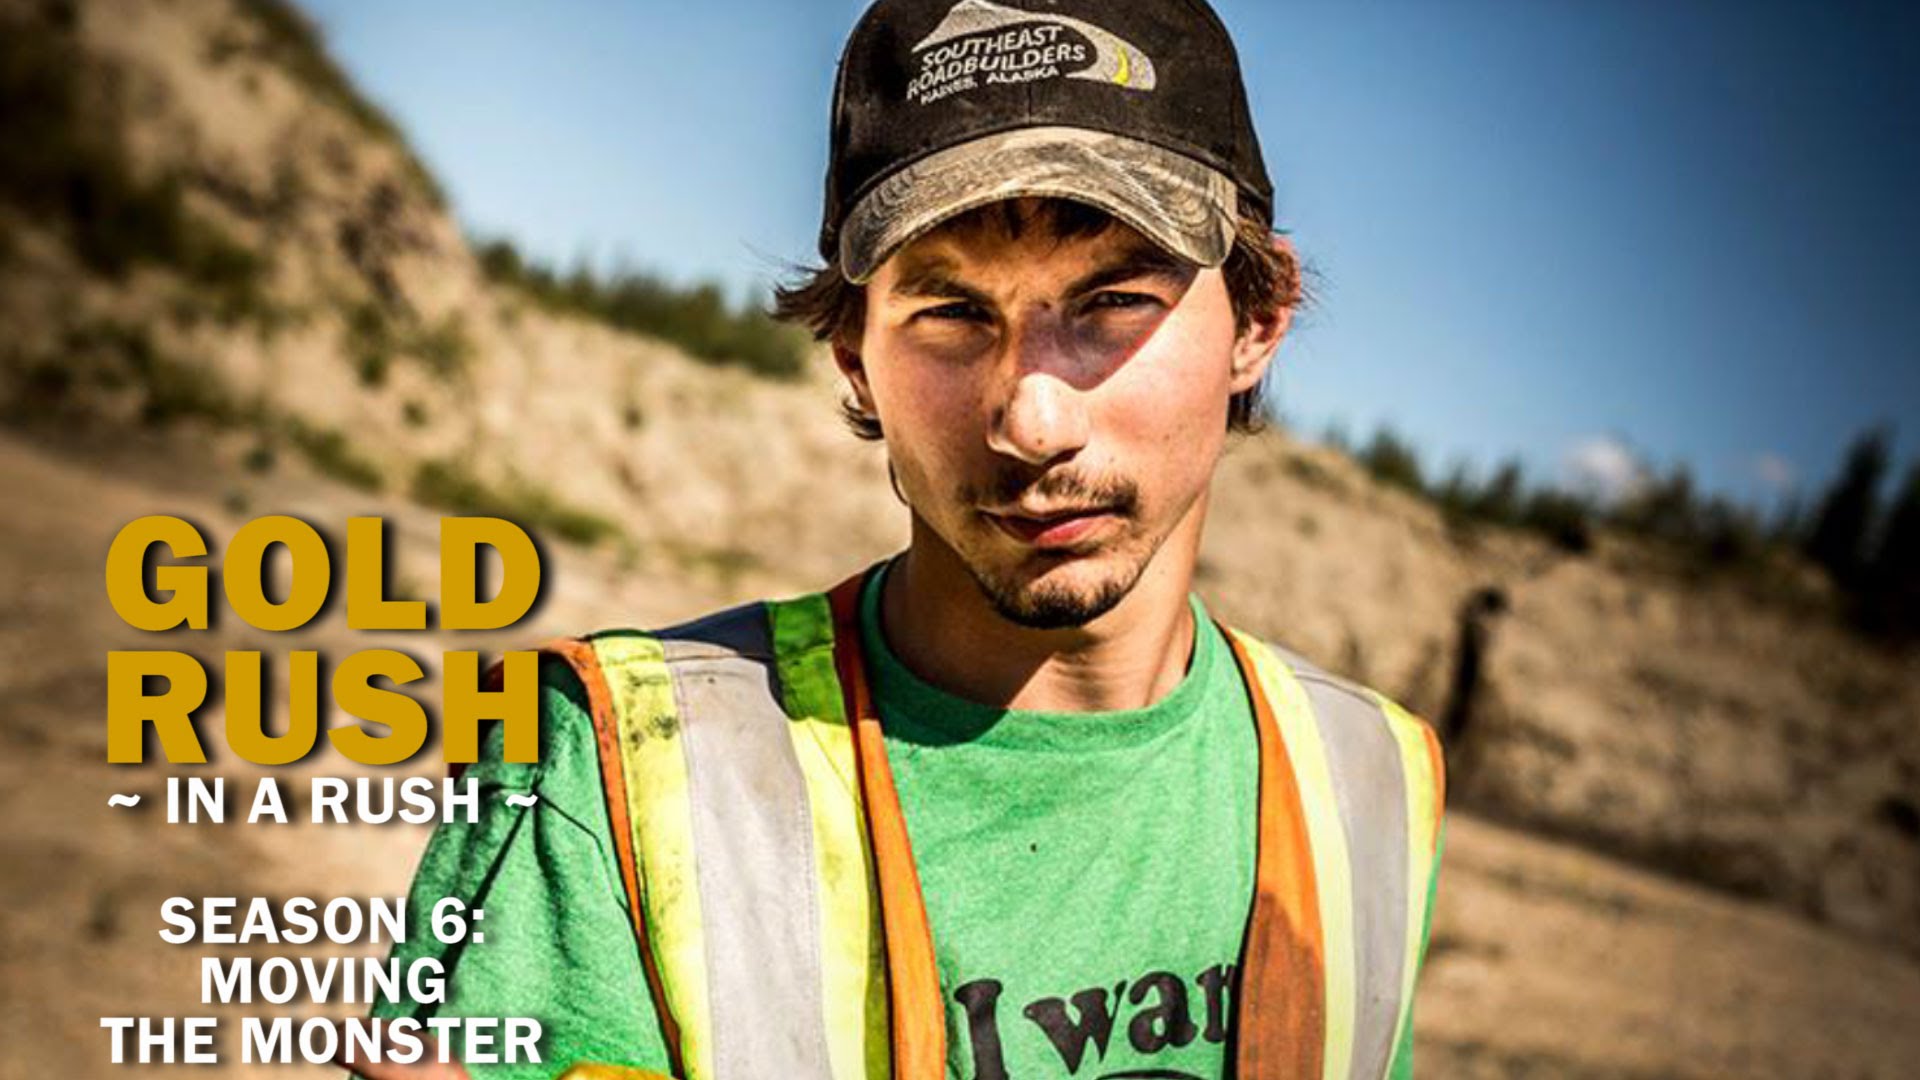 'Gold Rush' Season 6 Finale Q&A with Parker Schnabel